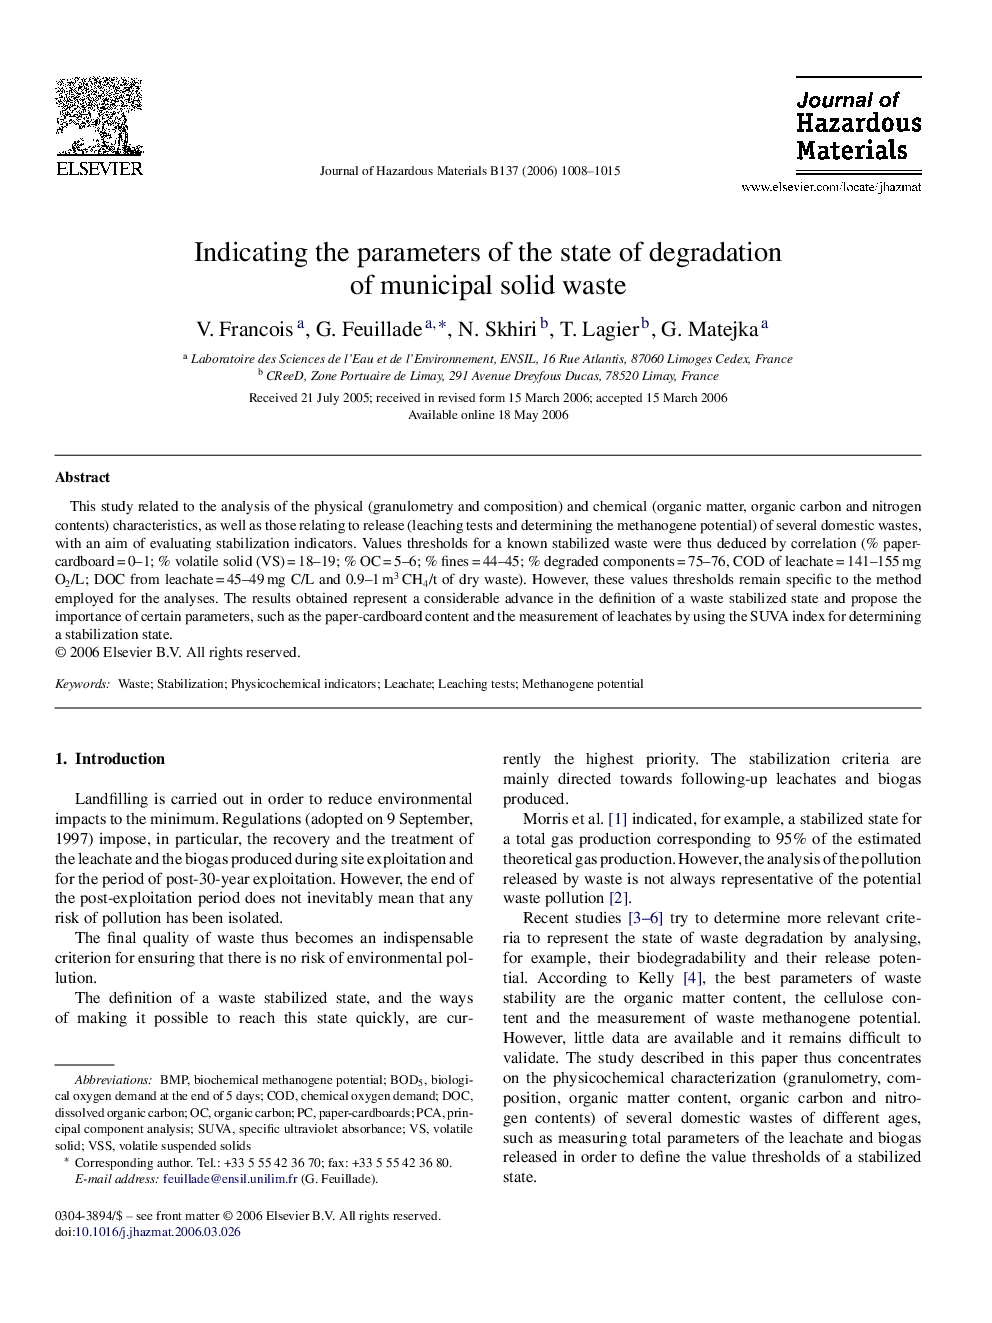 Indicating the parameters of the state of degradation of municipal solid waste